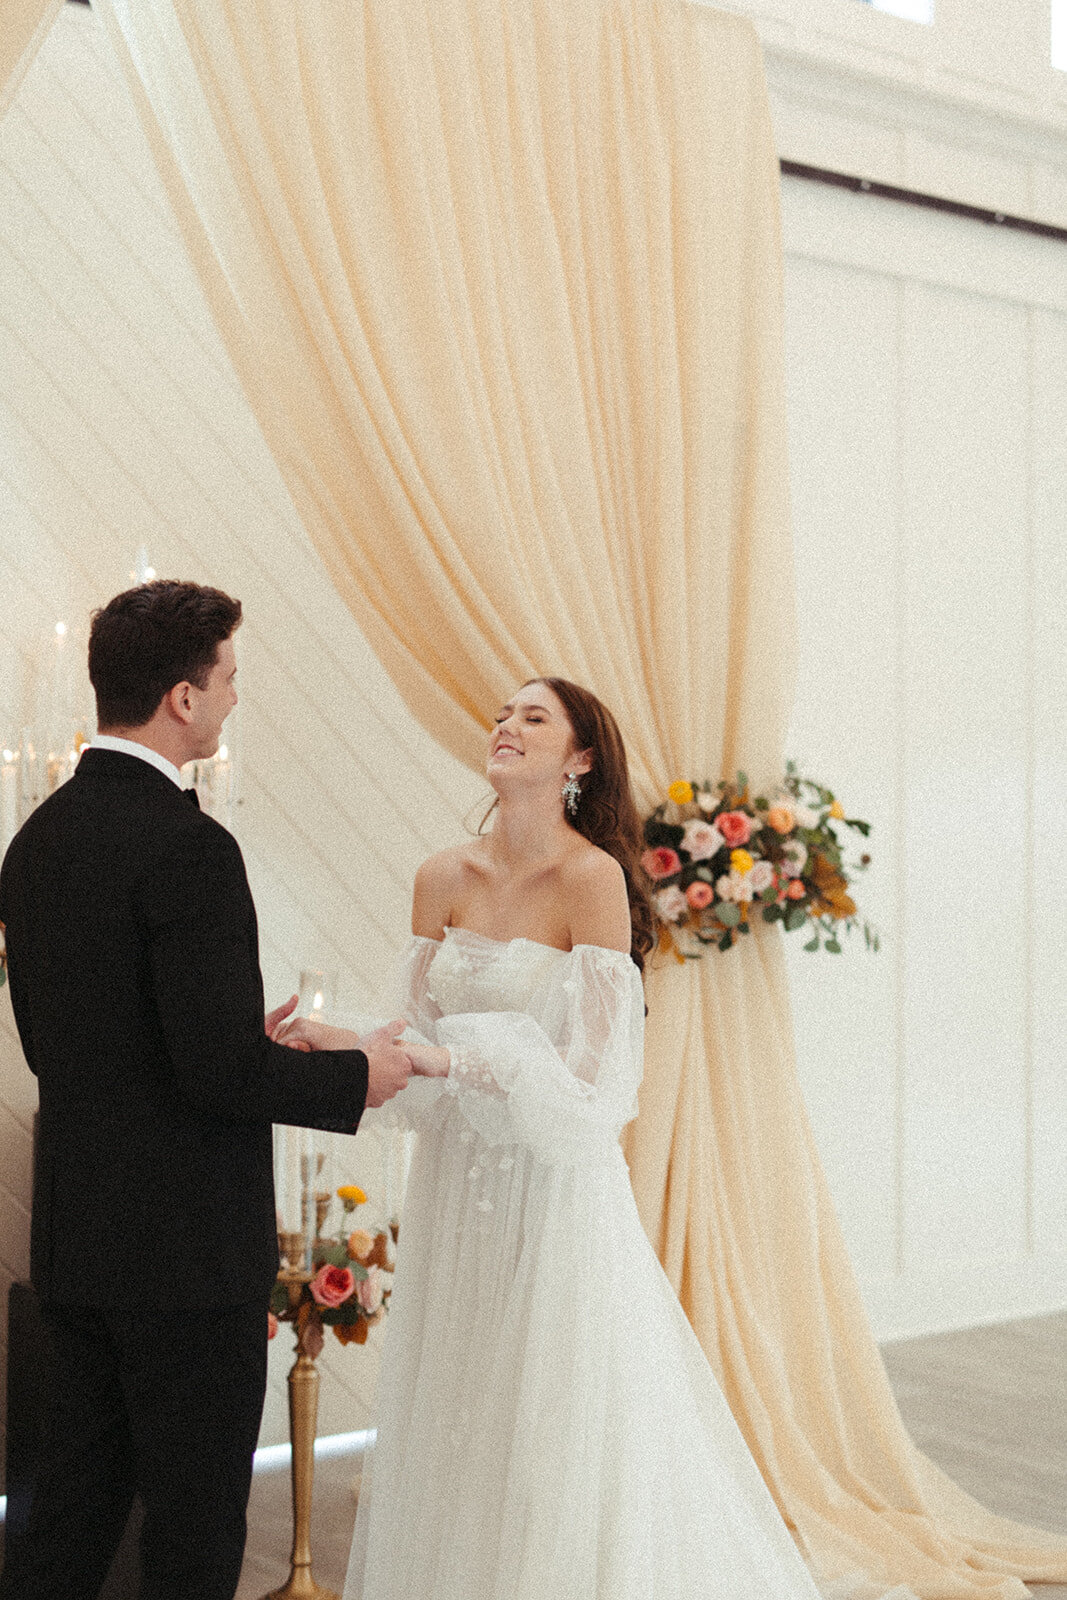 A groom wearing a black tuxedo holds bride wearing a white wedding gown by the hands in front of peach curtains with flowers.